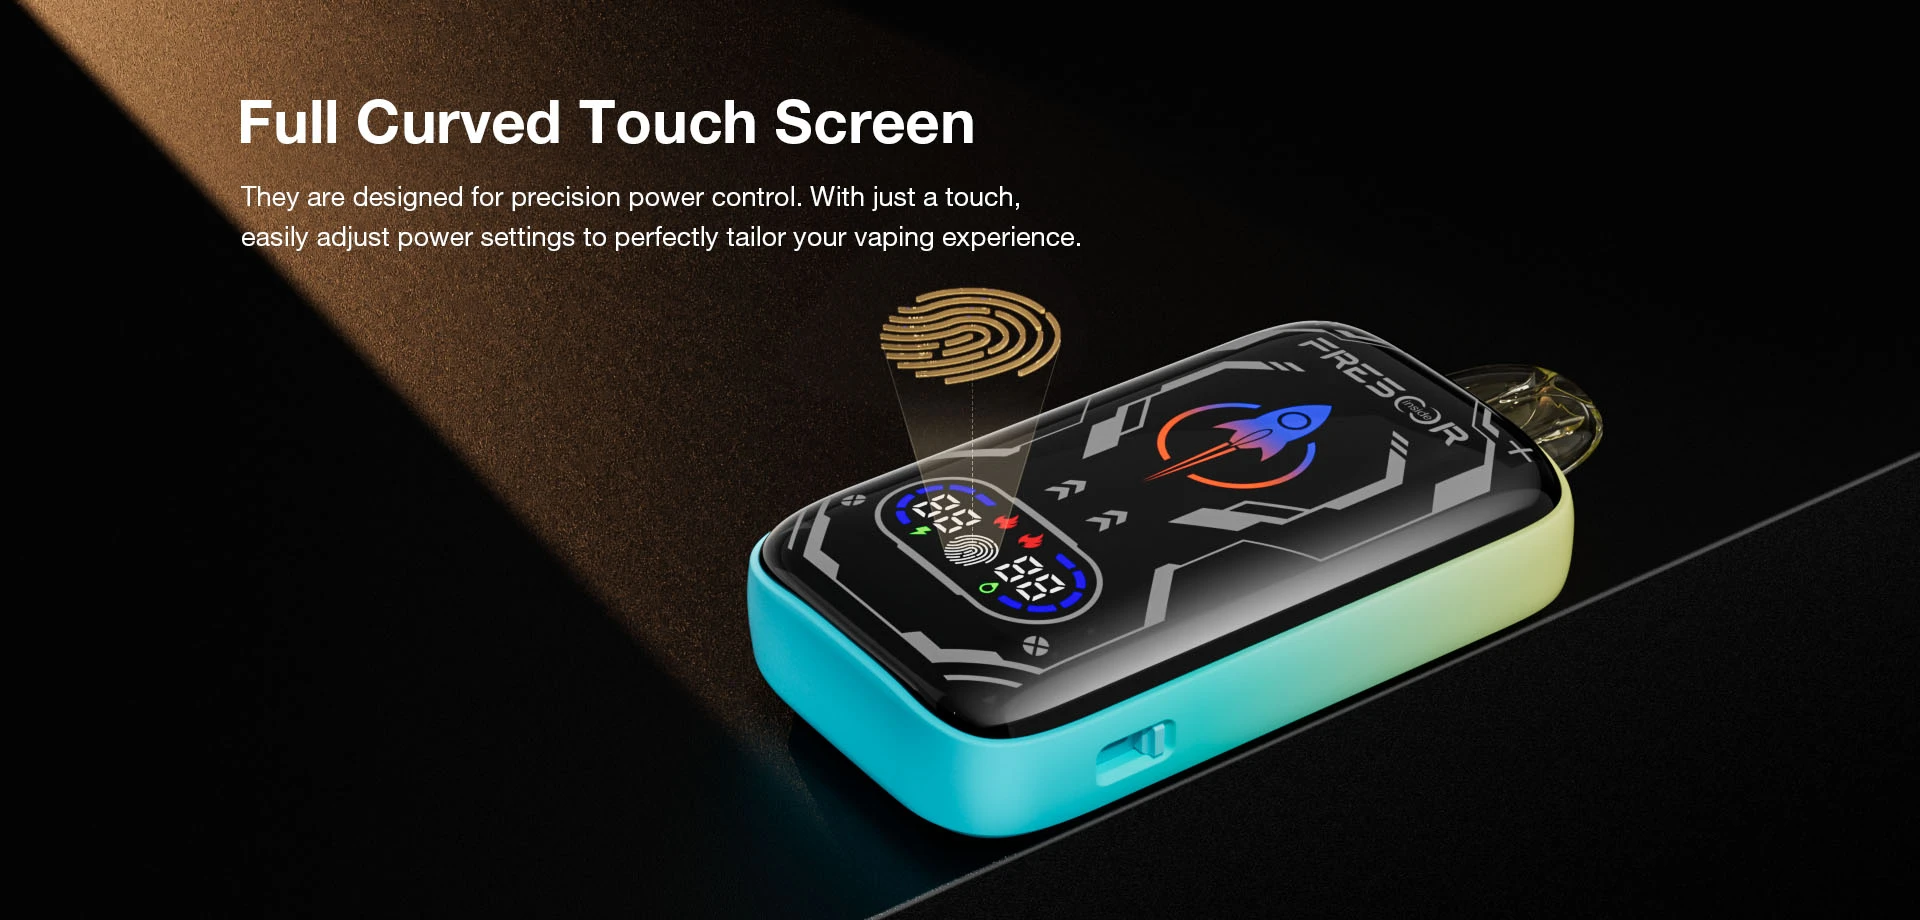 Full Curved Touch Screen They are designed for precision power control. With just a touch. easily adjust power settings to perfectly tailor your vaping experience.